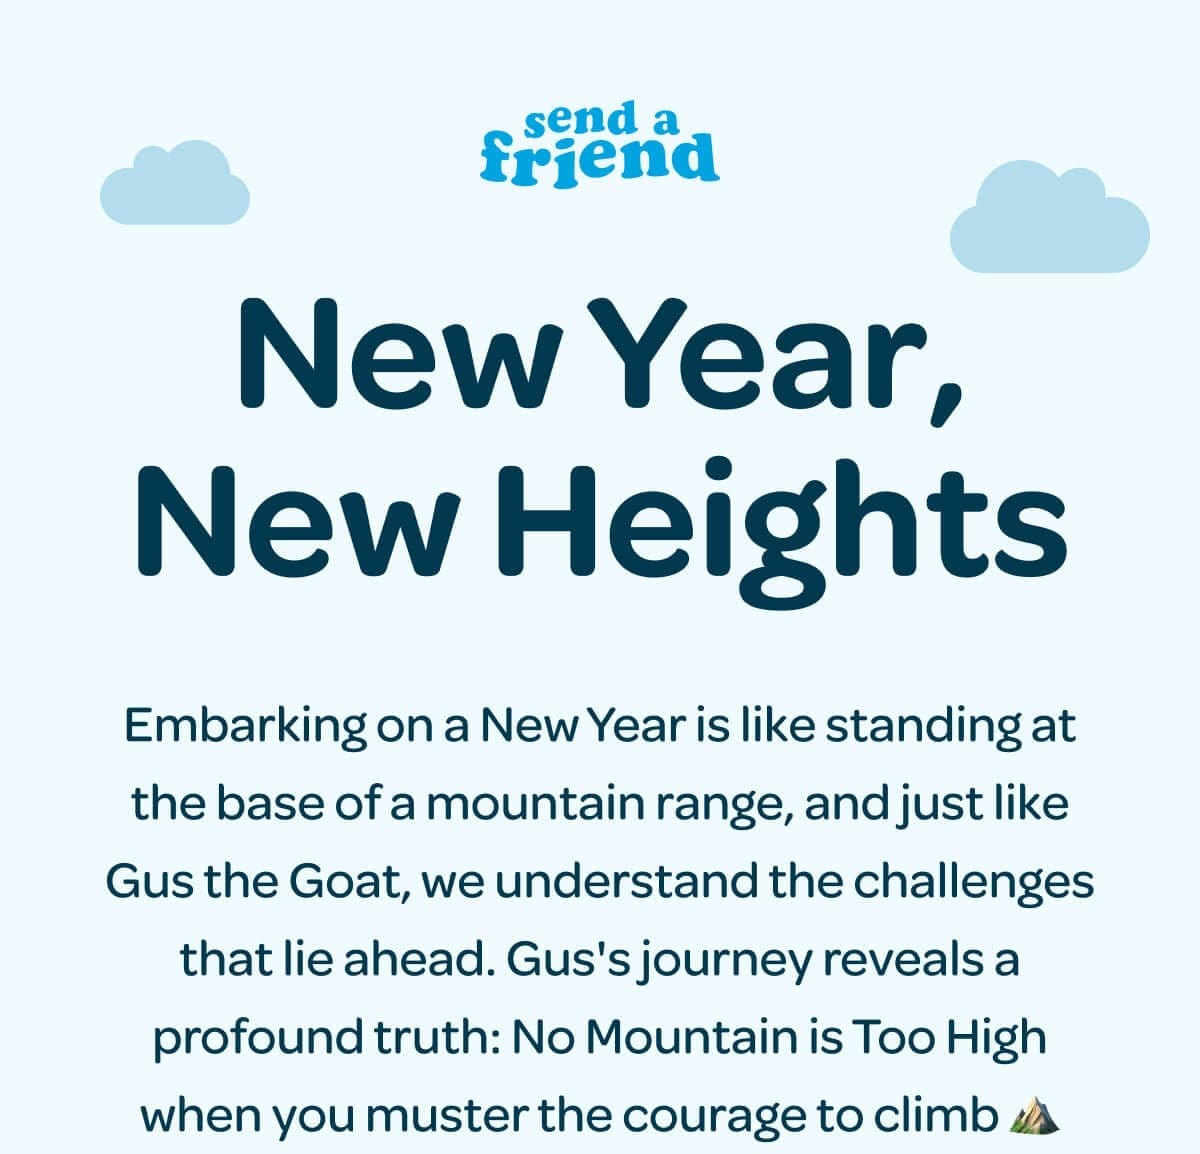 New Year, New Heights. Embarking on a New Year is like standing at the base of a mountain range, and just like Gus the Goat, we understand the challenges that lie ahead. Gus's journey reveals a profound truth: No Mountain is Too High when you muster the courage to climb ⛰️